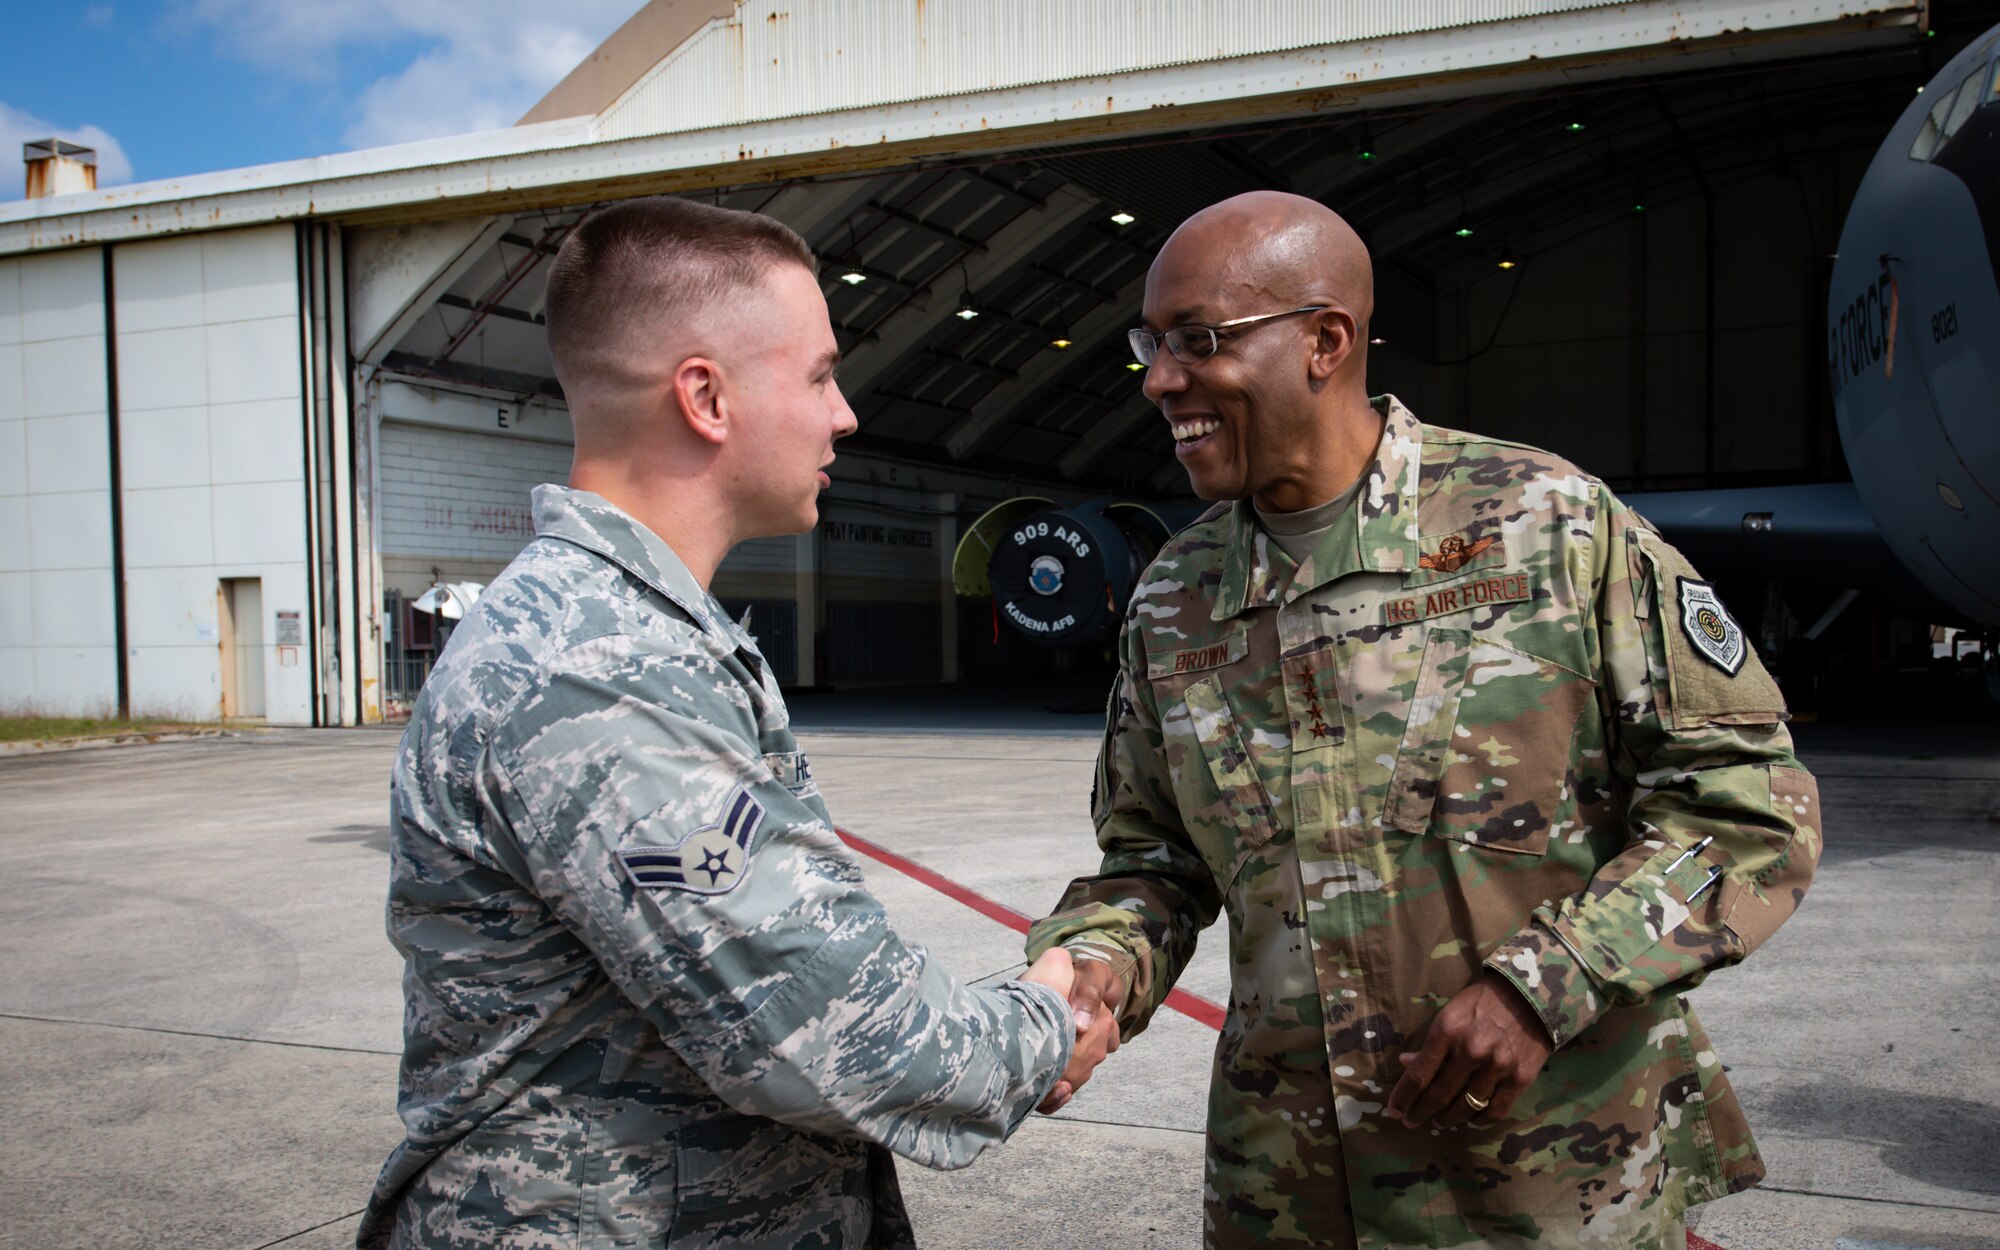 U.S. Air Force Gen. CQ Brown, Jr., Pacific Air Forces commander, coins Airman 1st Class Tucker Heyduk, 18th Civil Engineer Squadron barrier maintenance technician, during a tour at Kadena Air Base, Japan, Nov. 12, 2019. During the tour, Brown coined Airmen from different units as a way of thanks and recognition of their superior performance. (U.S. Air Force photo by Staff Sgt. Benjamin Raughton)